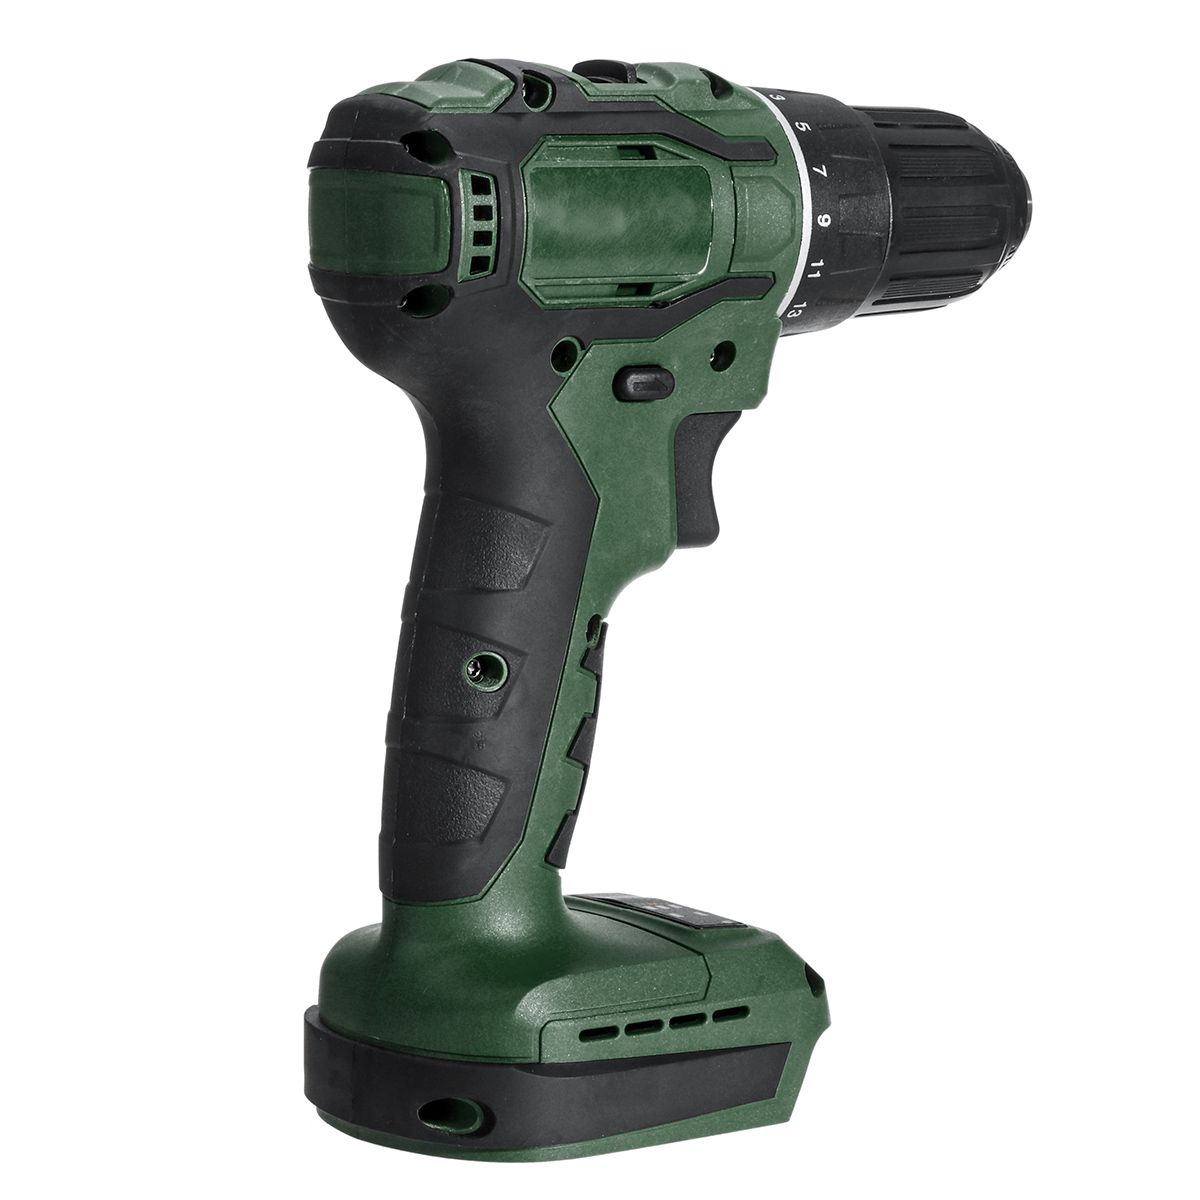 1800rpm-12quot-Cordless-Electric-Drill-Screwdriver-with-LED-Working-Light-211-Stage-Setting-Mode-1672883